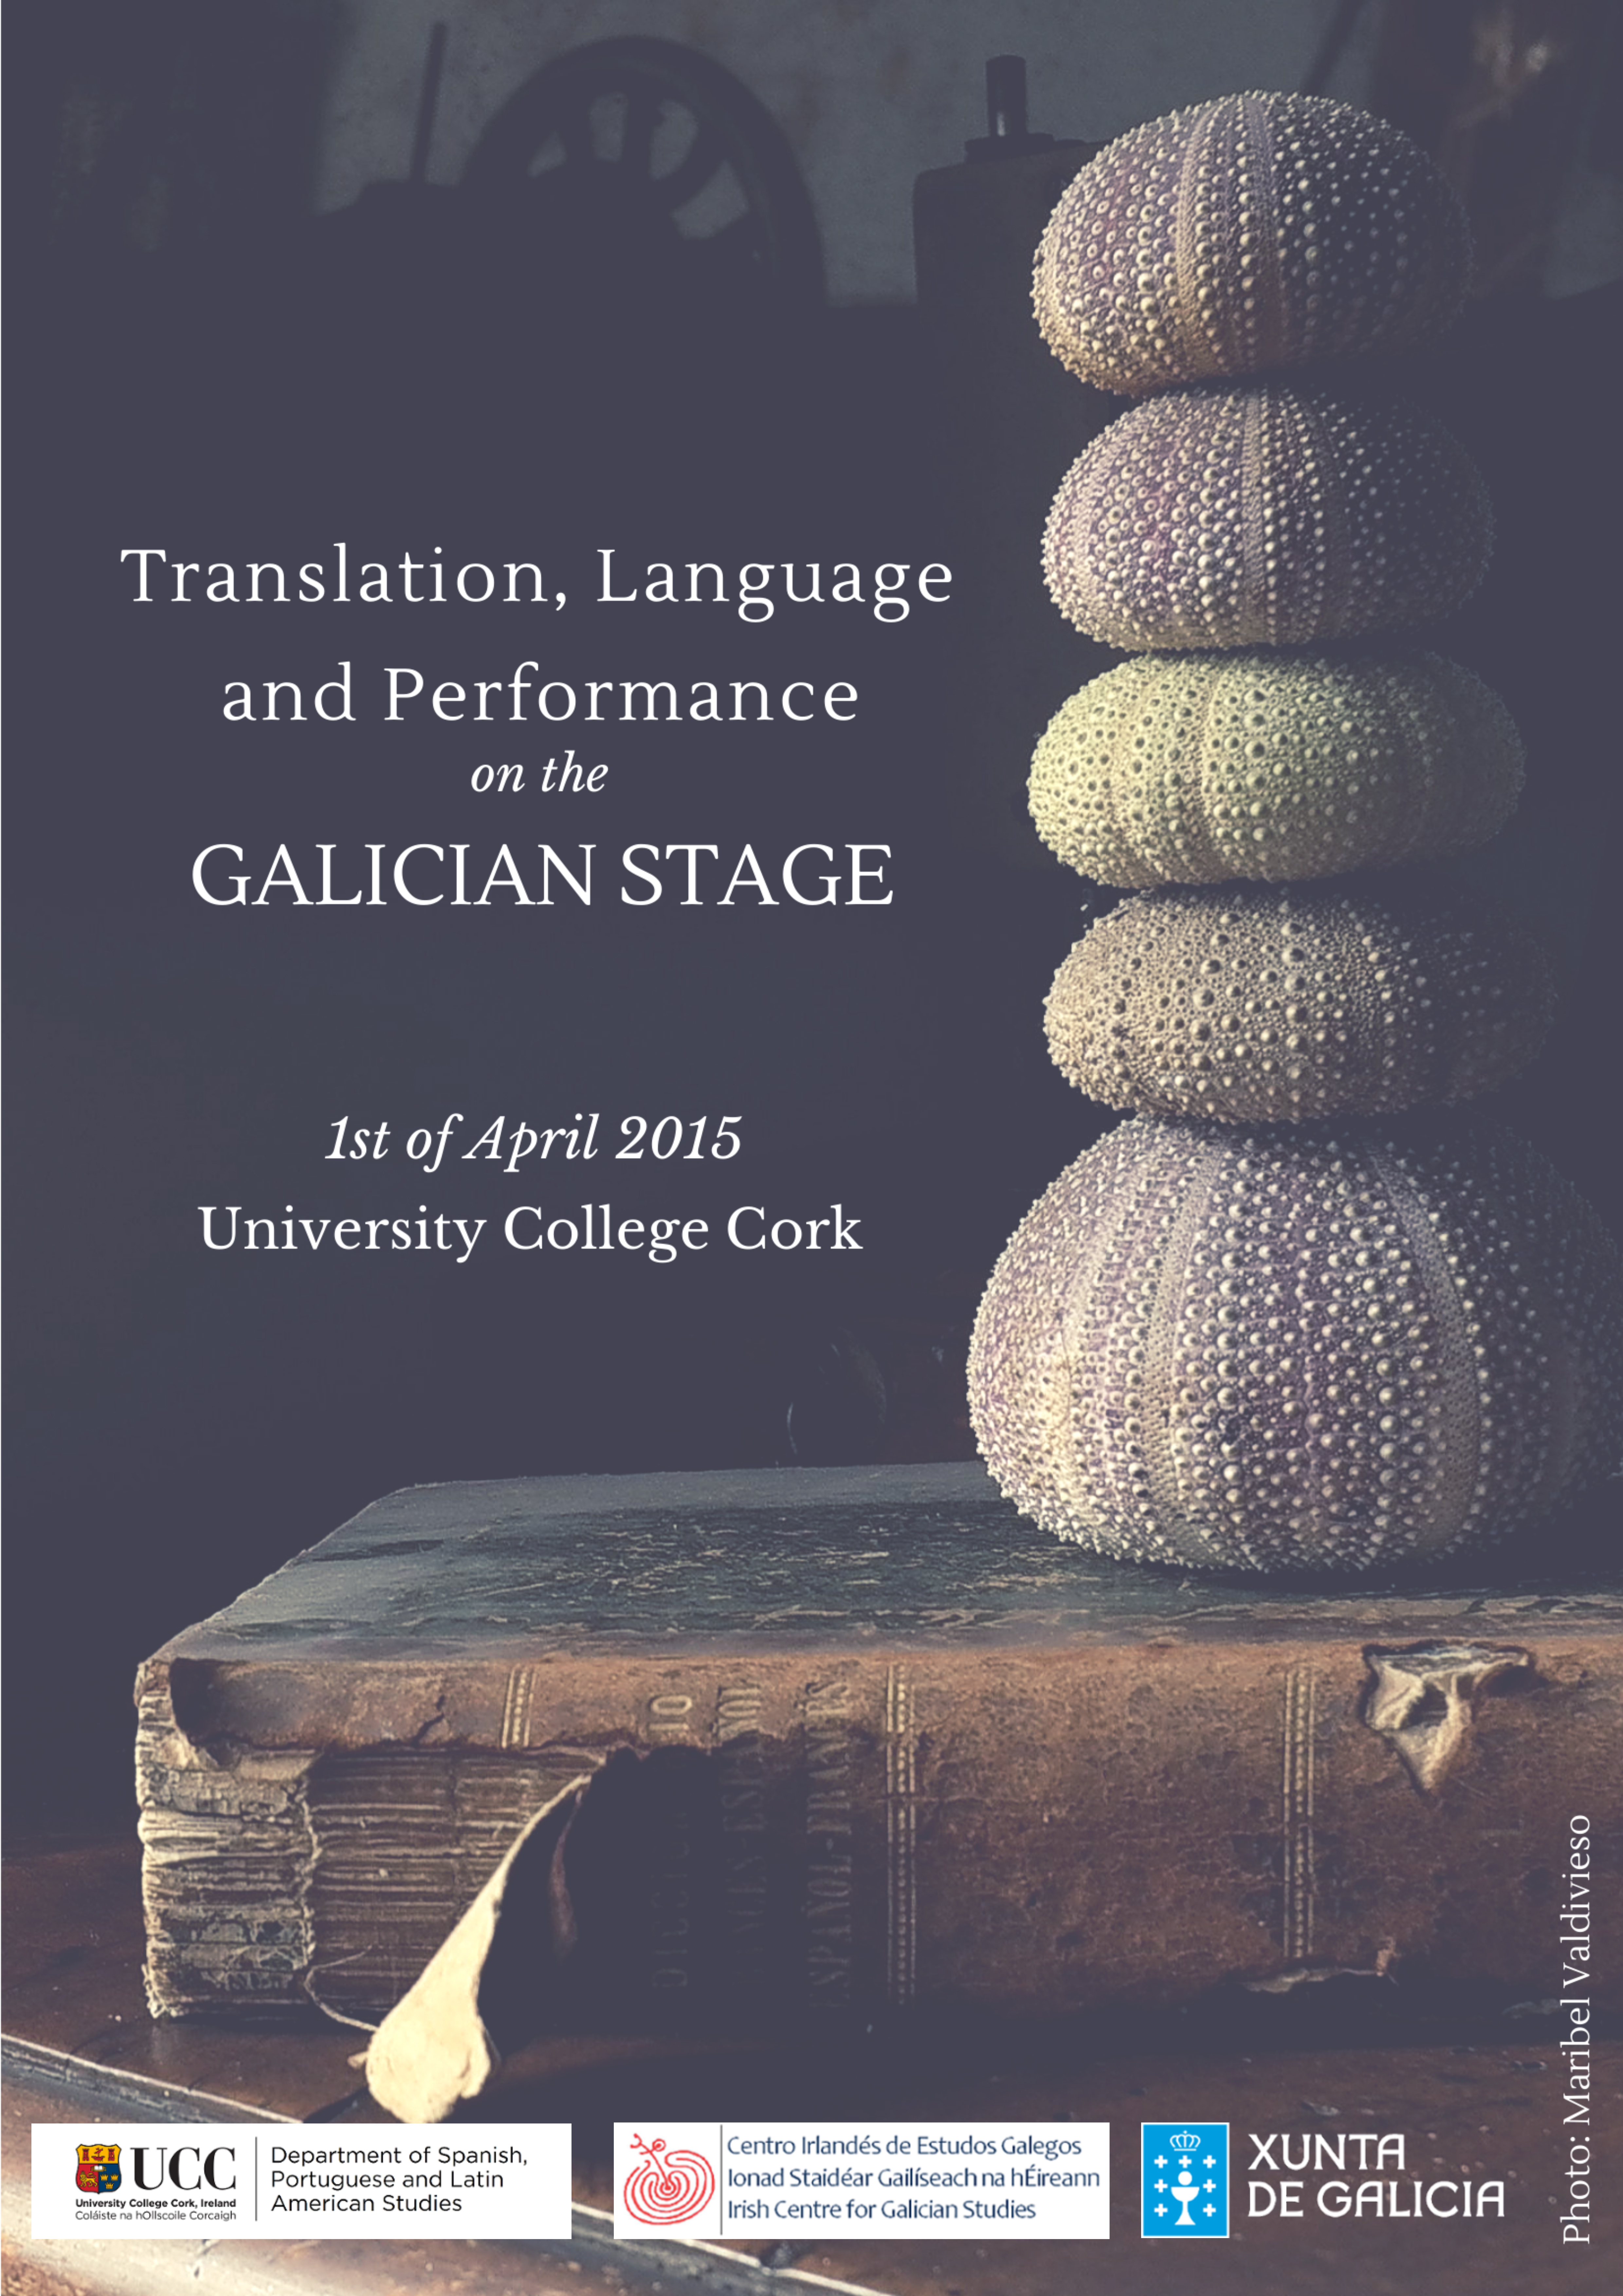 2015. April 1st. Symposium – Translation, Language and Performance on the Galician Stage